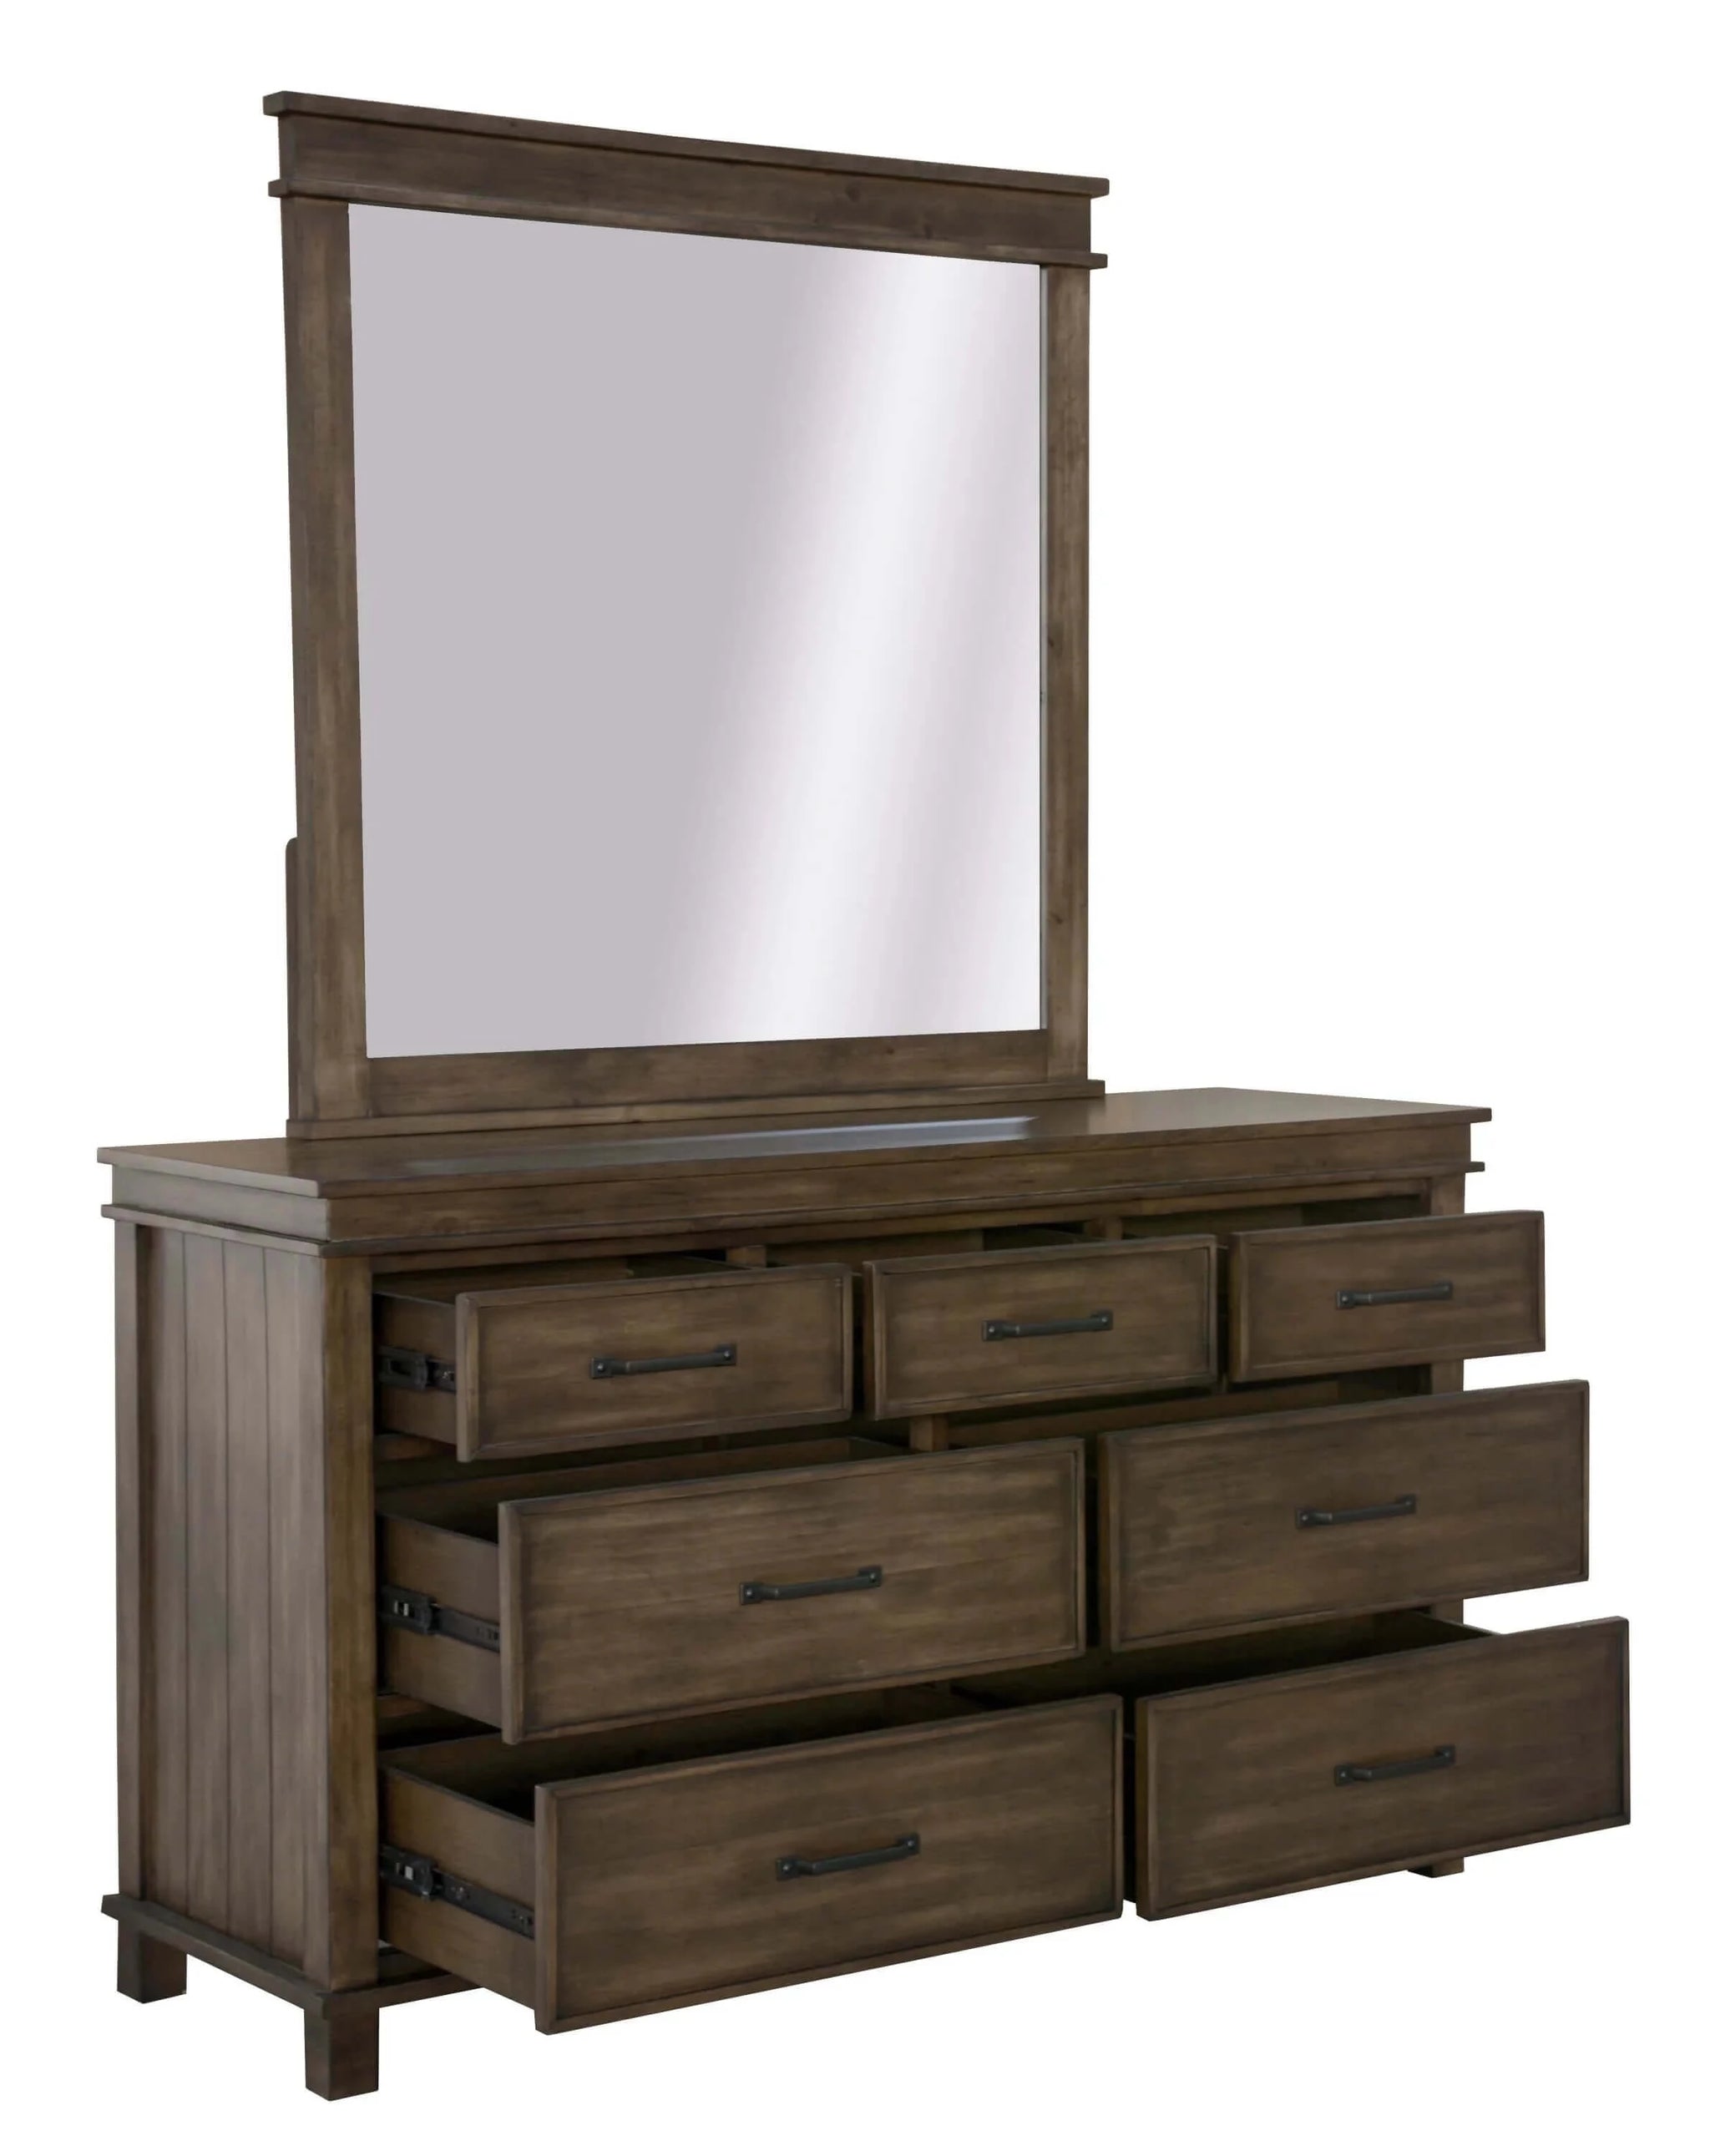 Buy lily dresser mirror 7 chest of drawers tallboy storage cabinet - rustic grey - upinteriors-Upinteriors